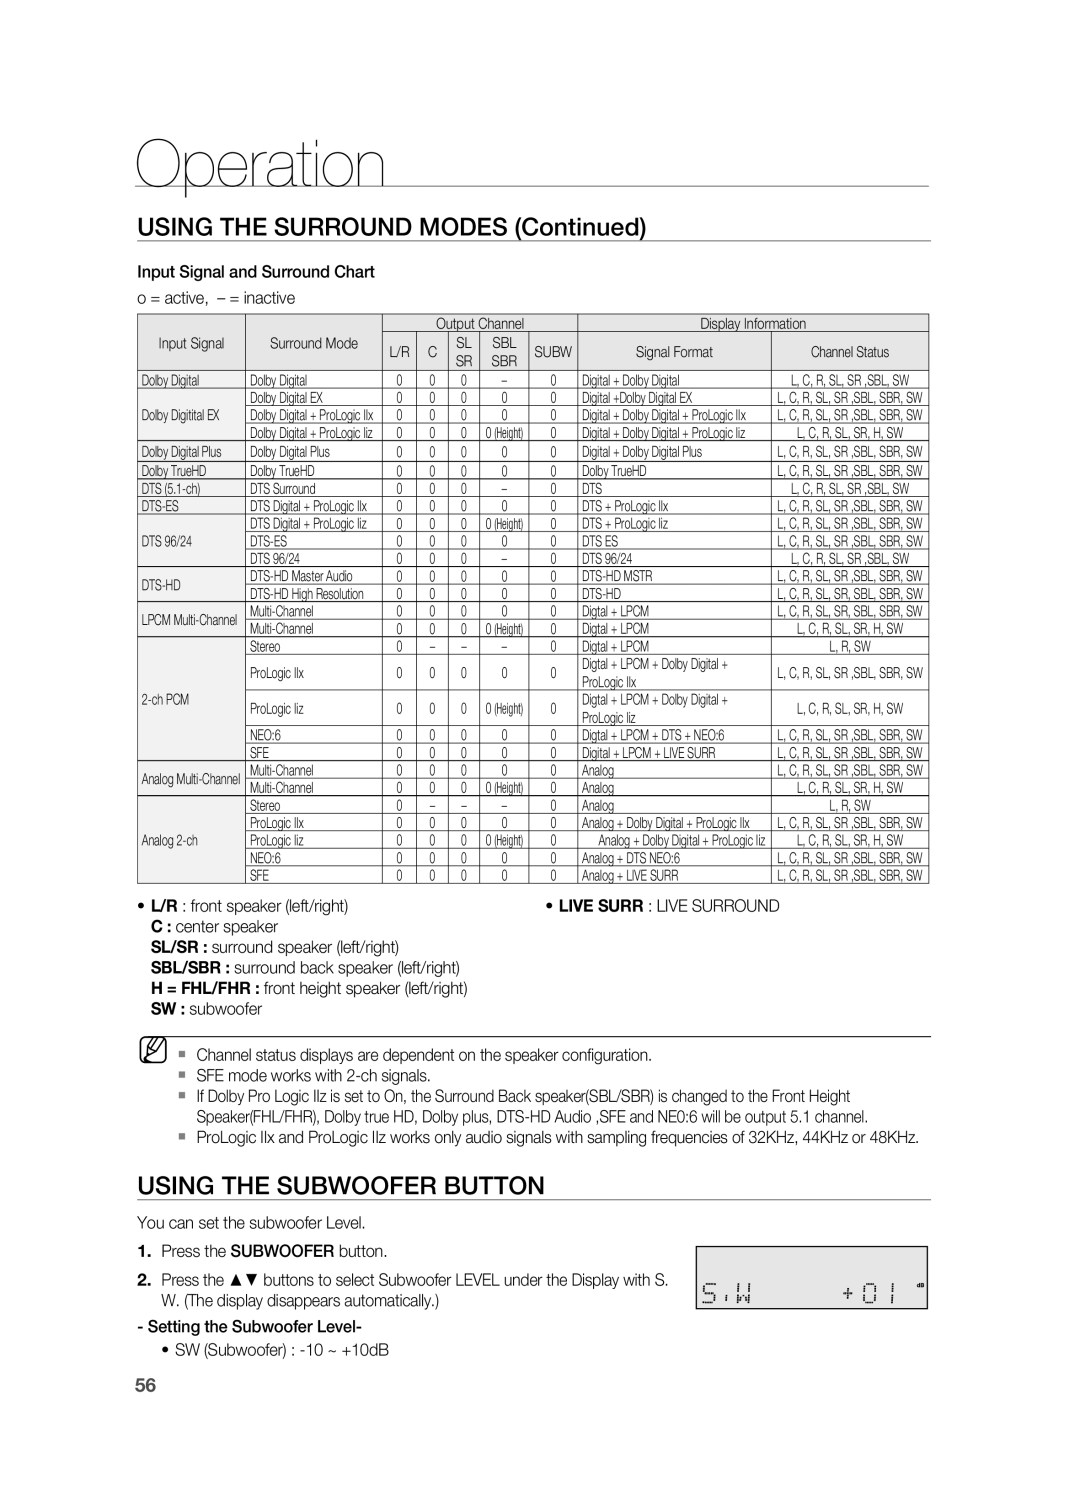 Samsung HW-C900-XAA user manual Operation, USING THE SURROUND MODES Continued, Using The Subwoofer Button 